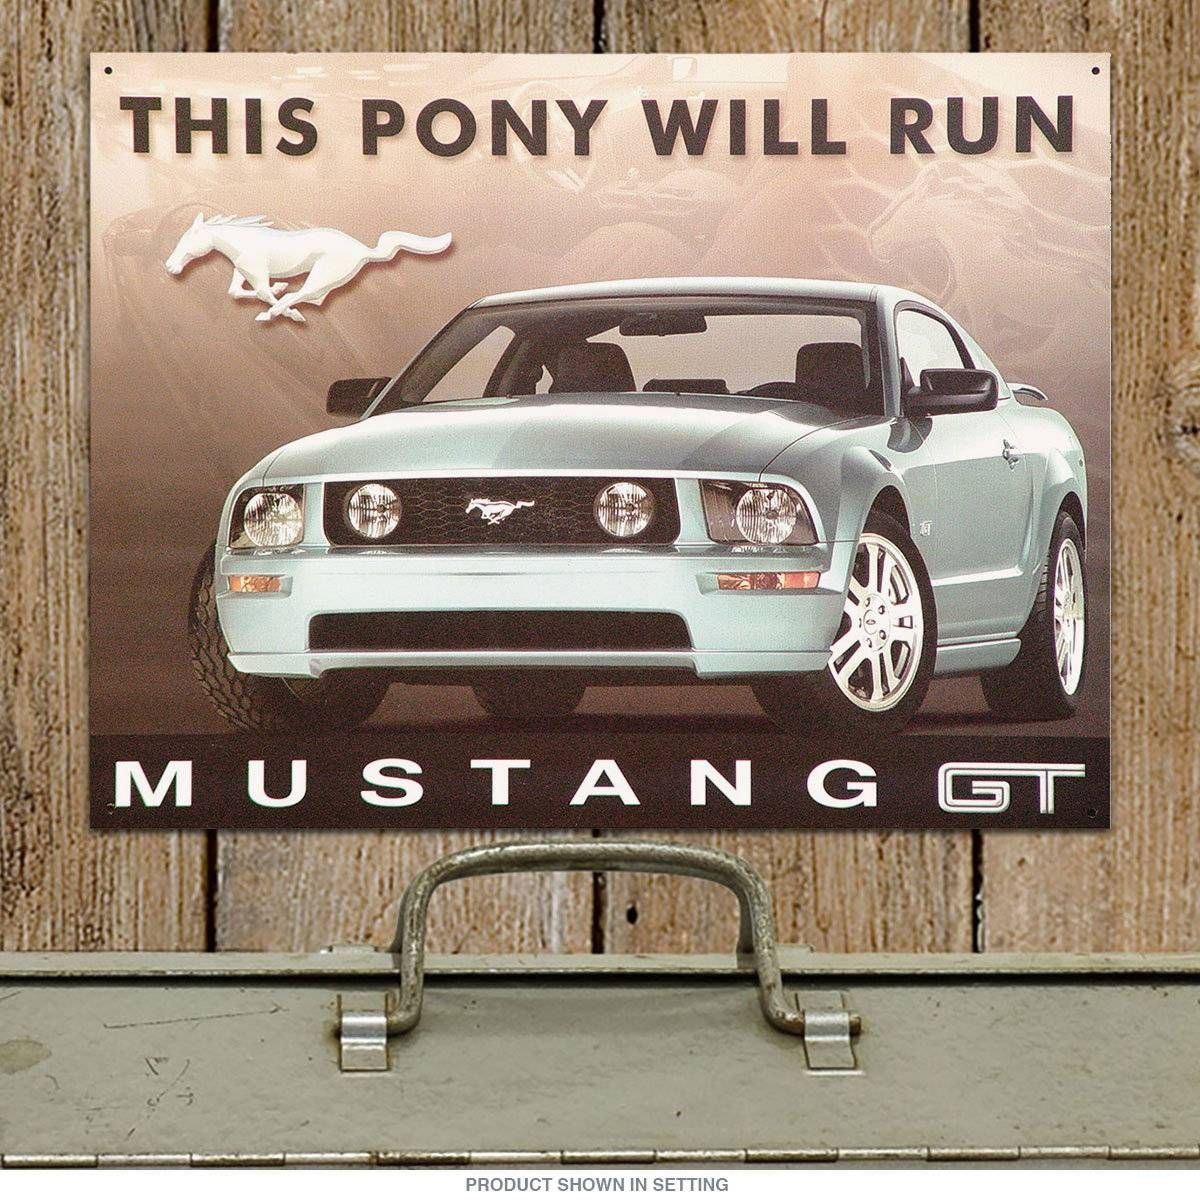 Mustang Gt Pony Will Run Metal Sign | Ford Garage Signs In Most Current Ford Mustang Metal Wall Art (View 16 of 20)